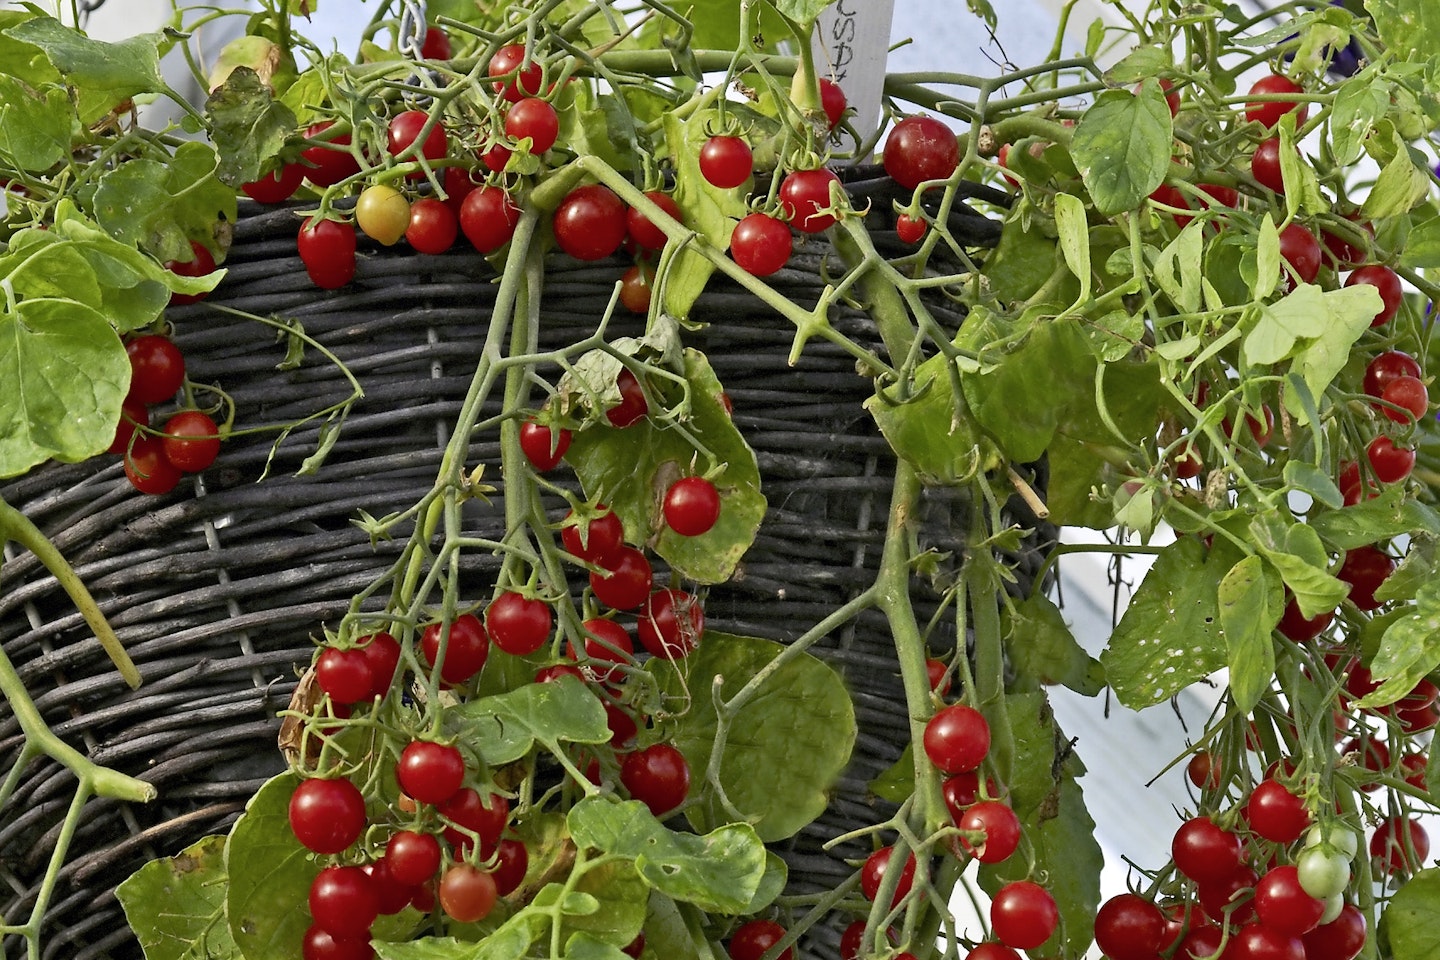 'Hundreds and Thousands' tomatoes growing in a hanging basket